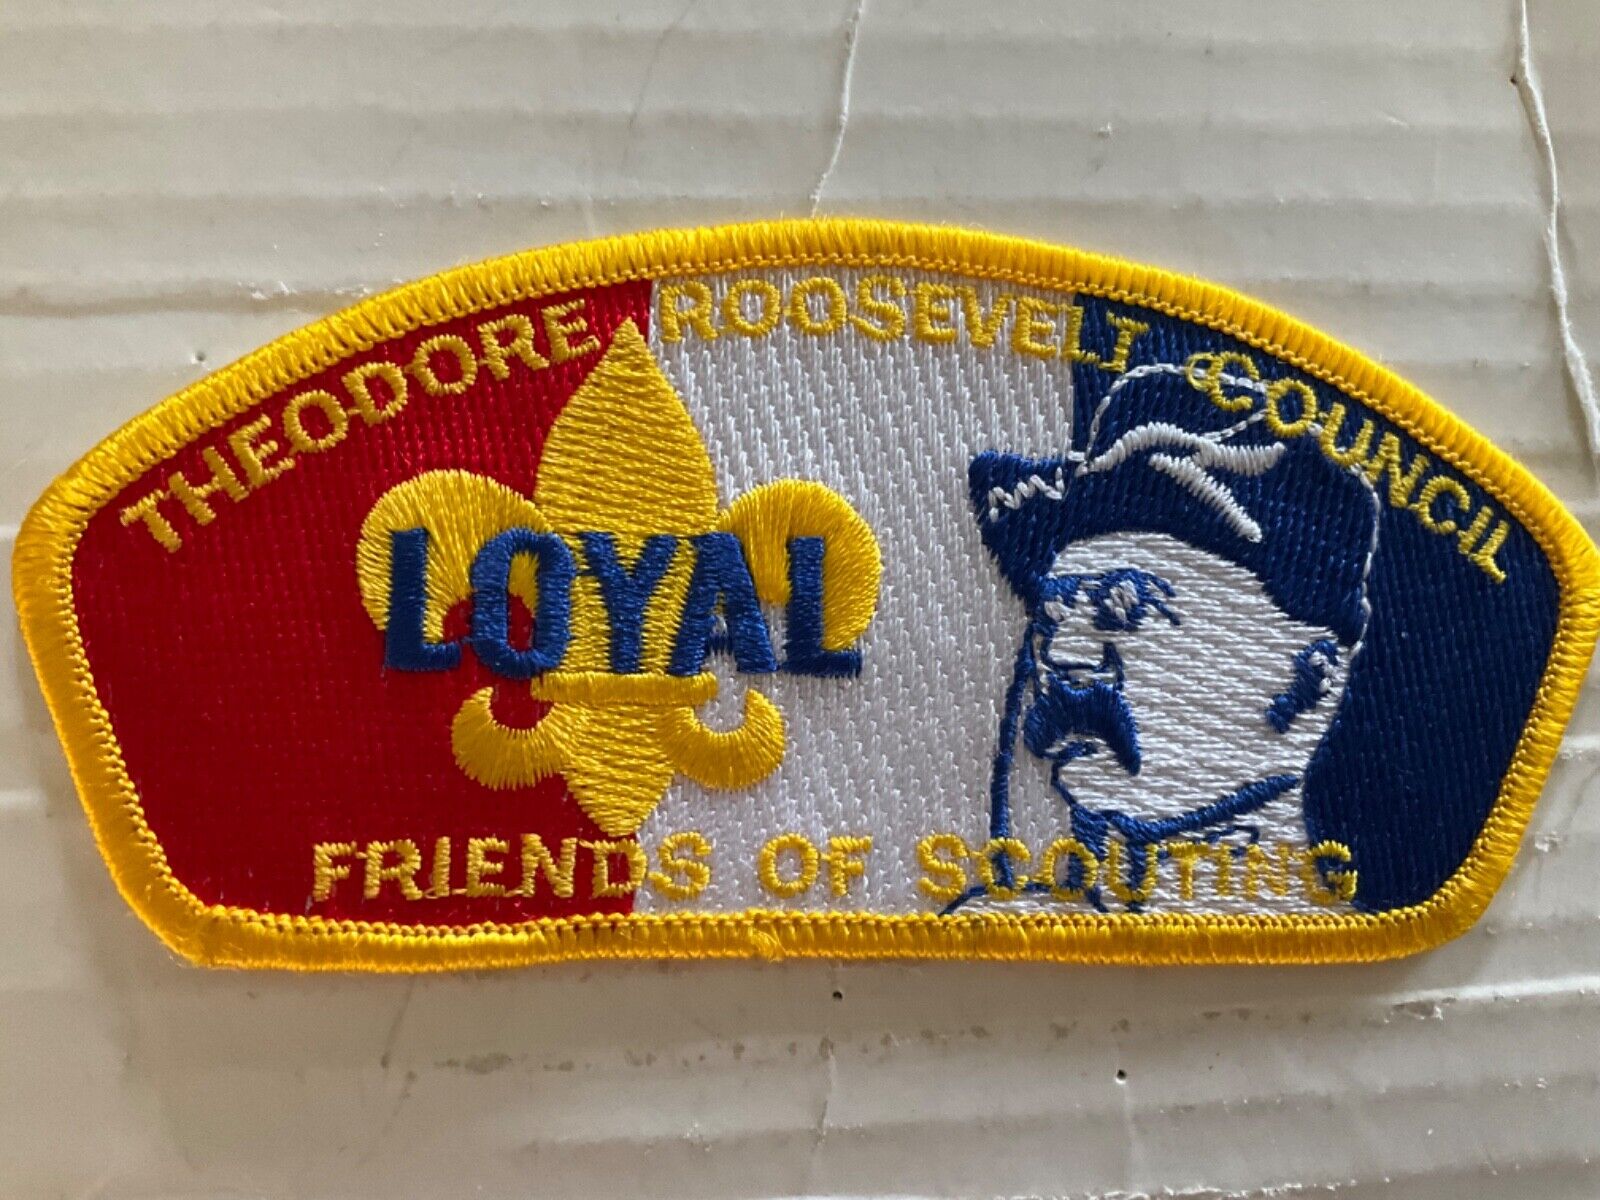 Theodore Roosevelt Council CSP FOS Loyal B